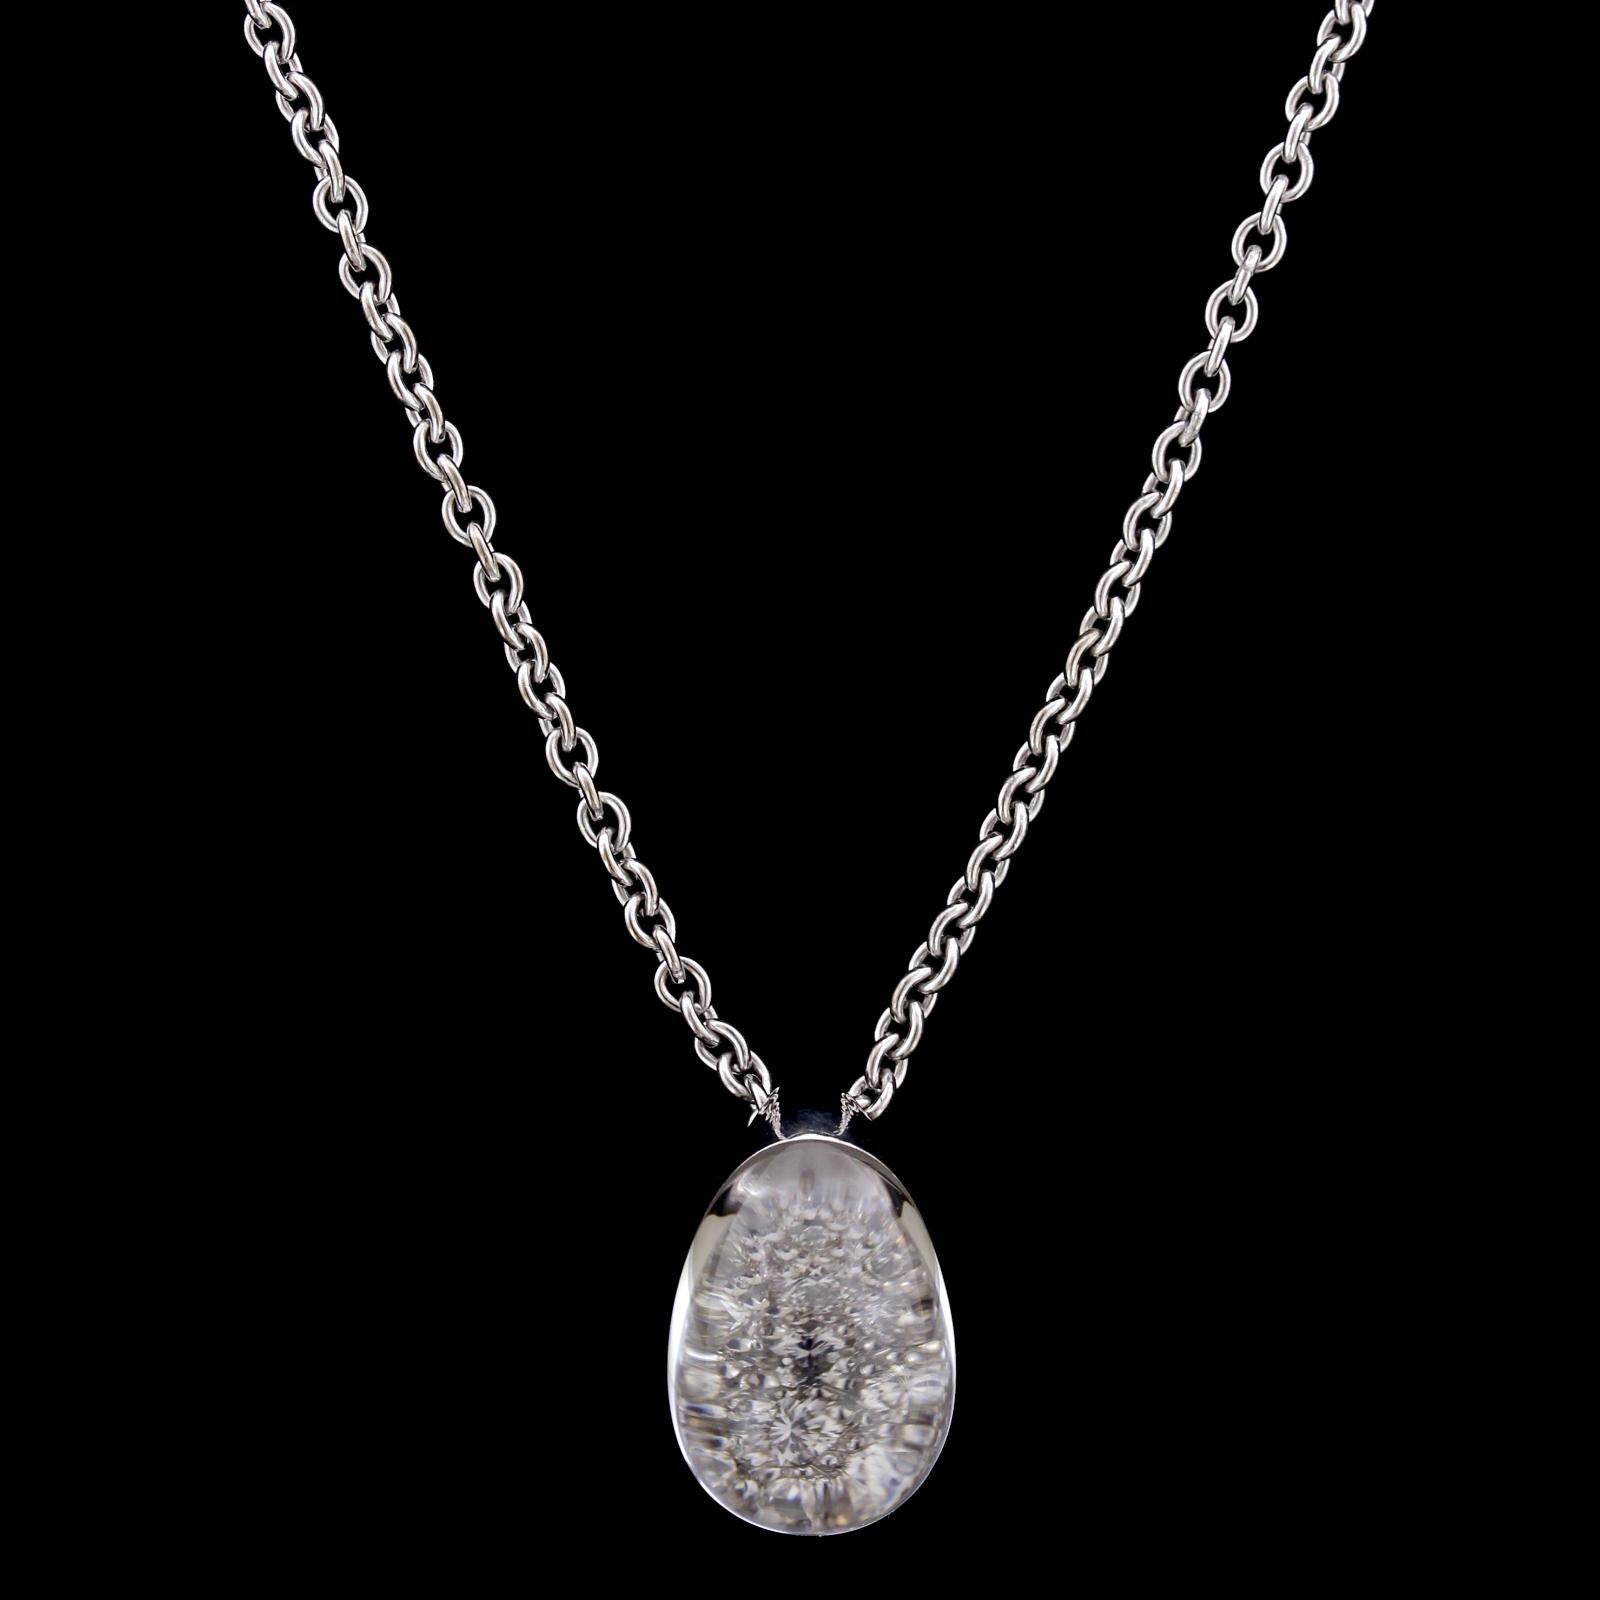 Cartier Myst De Cartier 18K White Gold Rock Crystal Diamond Pendant. The pendant is set with full cut diamonds, approx. total wt. .50cts., beneath a cabochon rock crystal, #939118, length 16